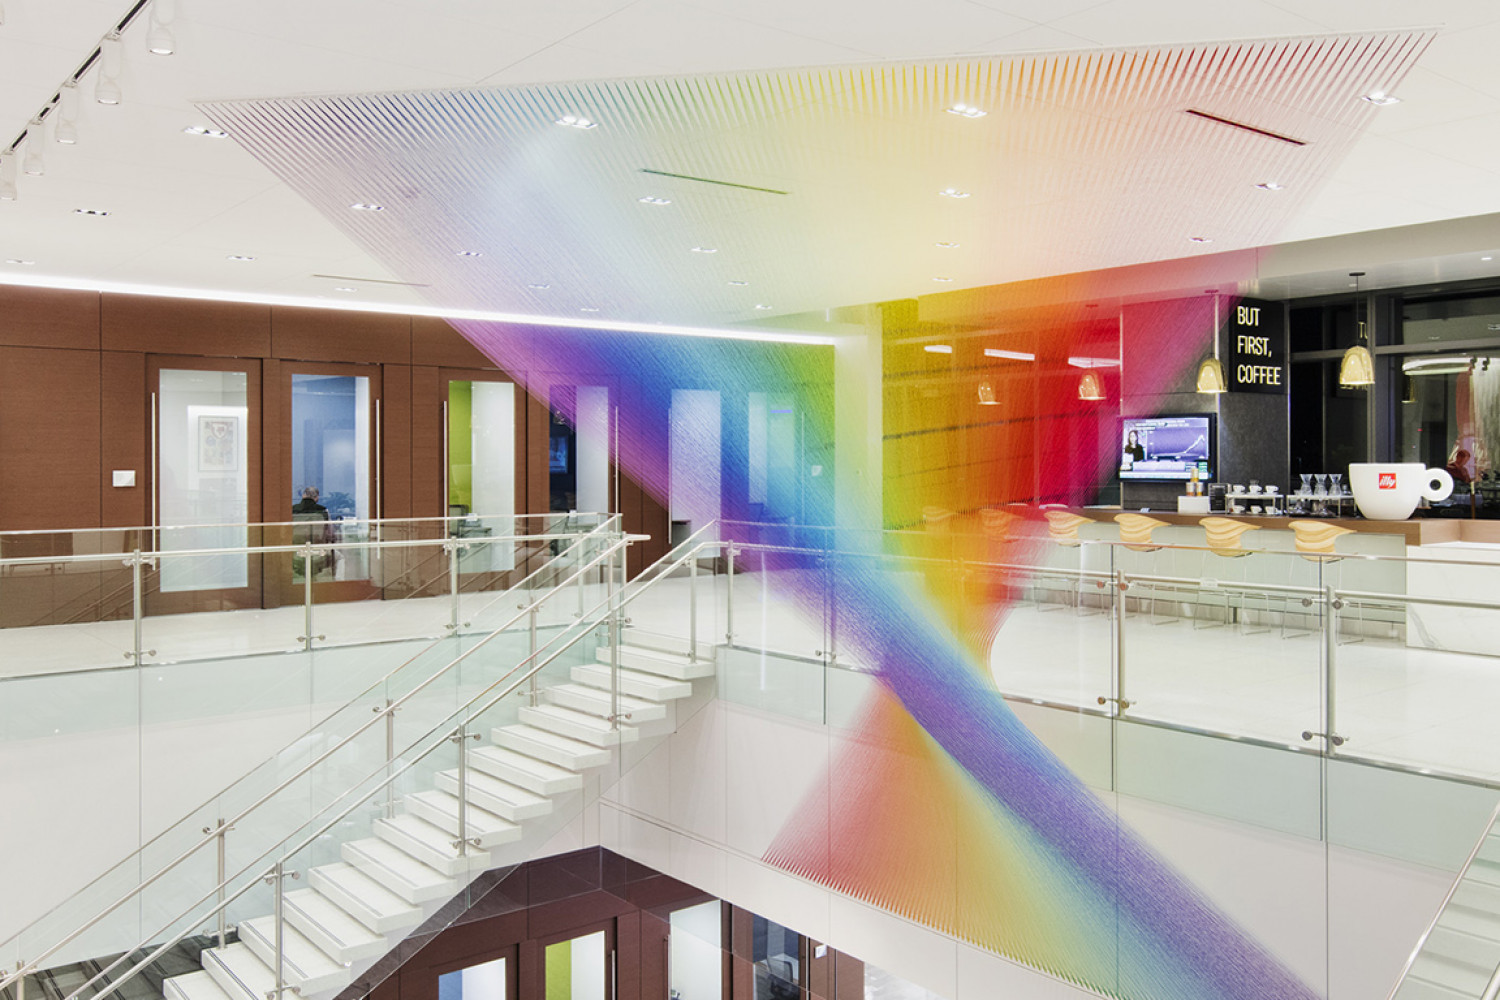 Plexus C23, Gabriel Dawe. Installed at Capital One Offices, Virginia. Photography courtesy of the artist